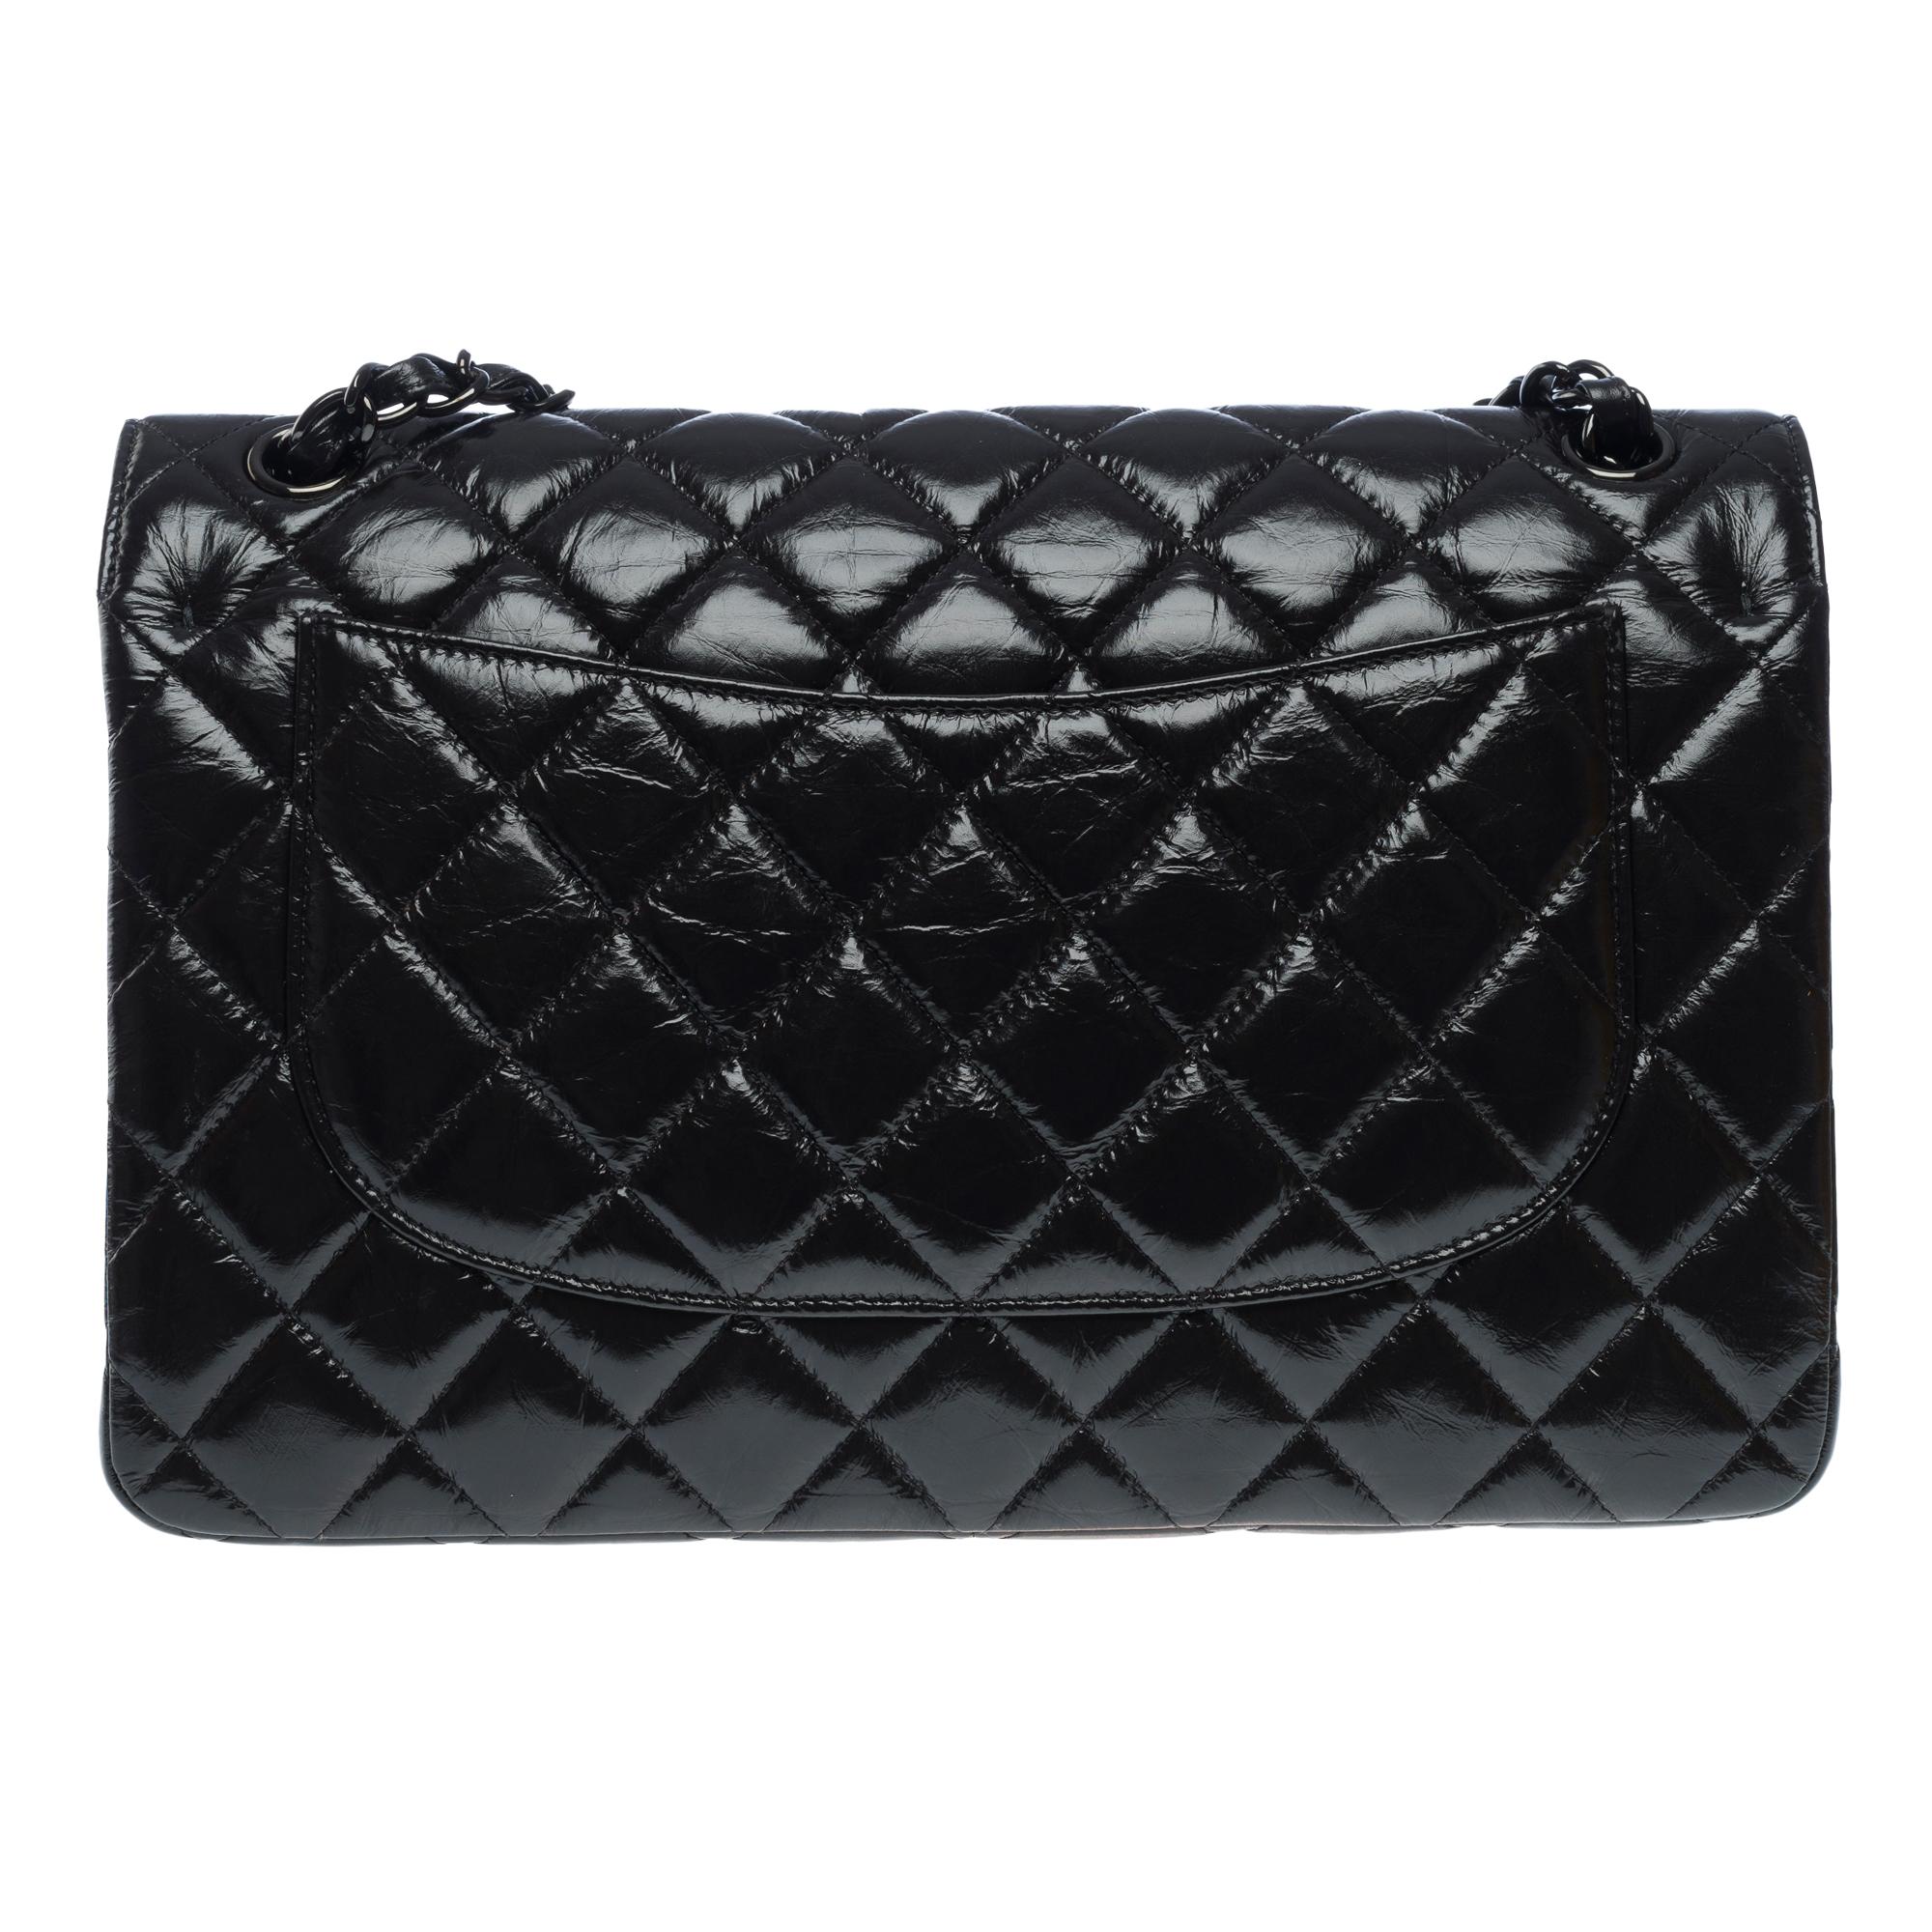 SO BLACK Chanel Timeless Jumbo double flap shoulder bag in Black Glazed leather In Excellent Condition In Paris, IDF